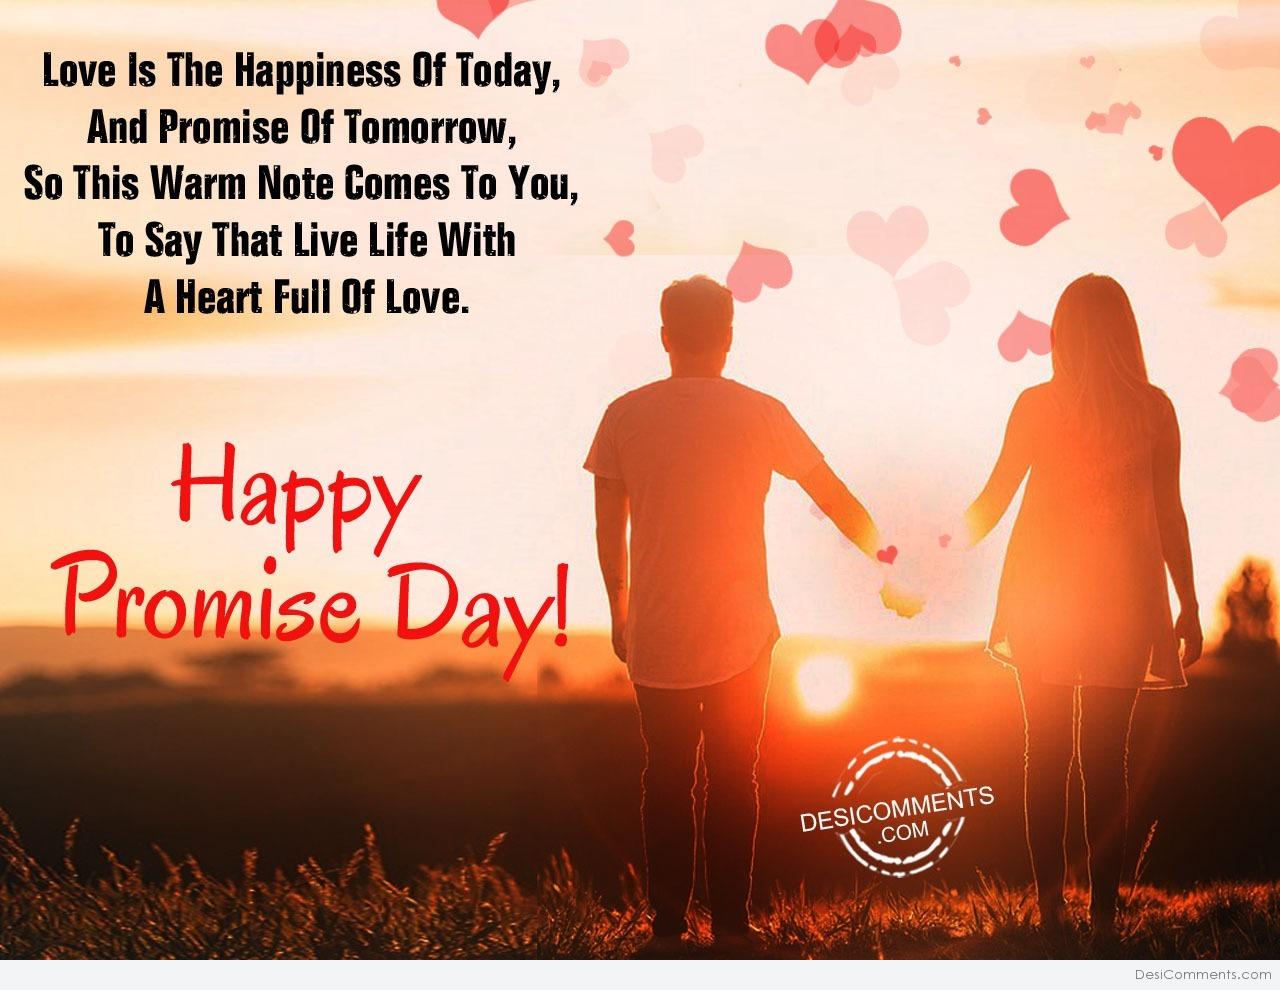 love is the happiness of today, Happy promise day - DesiComments.com